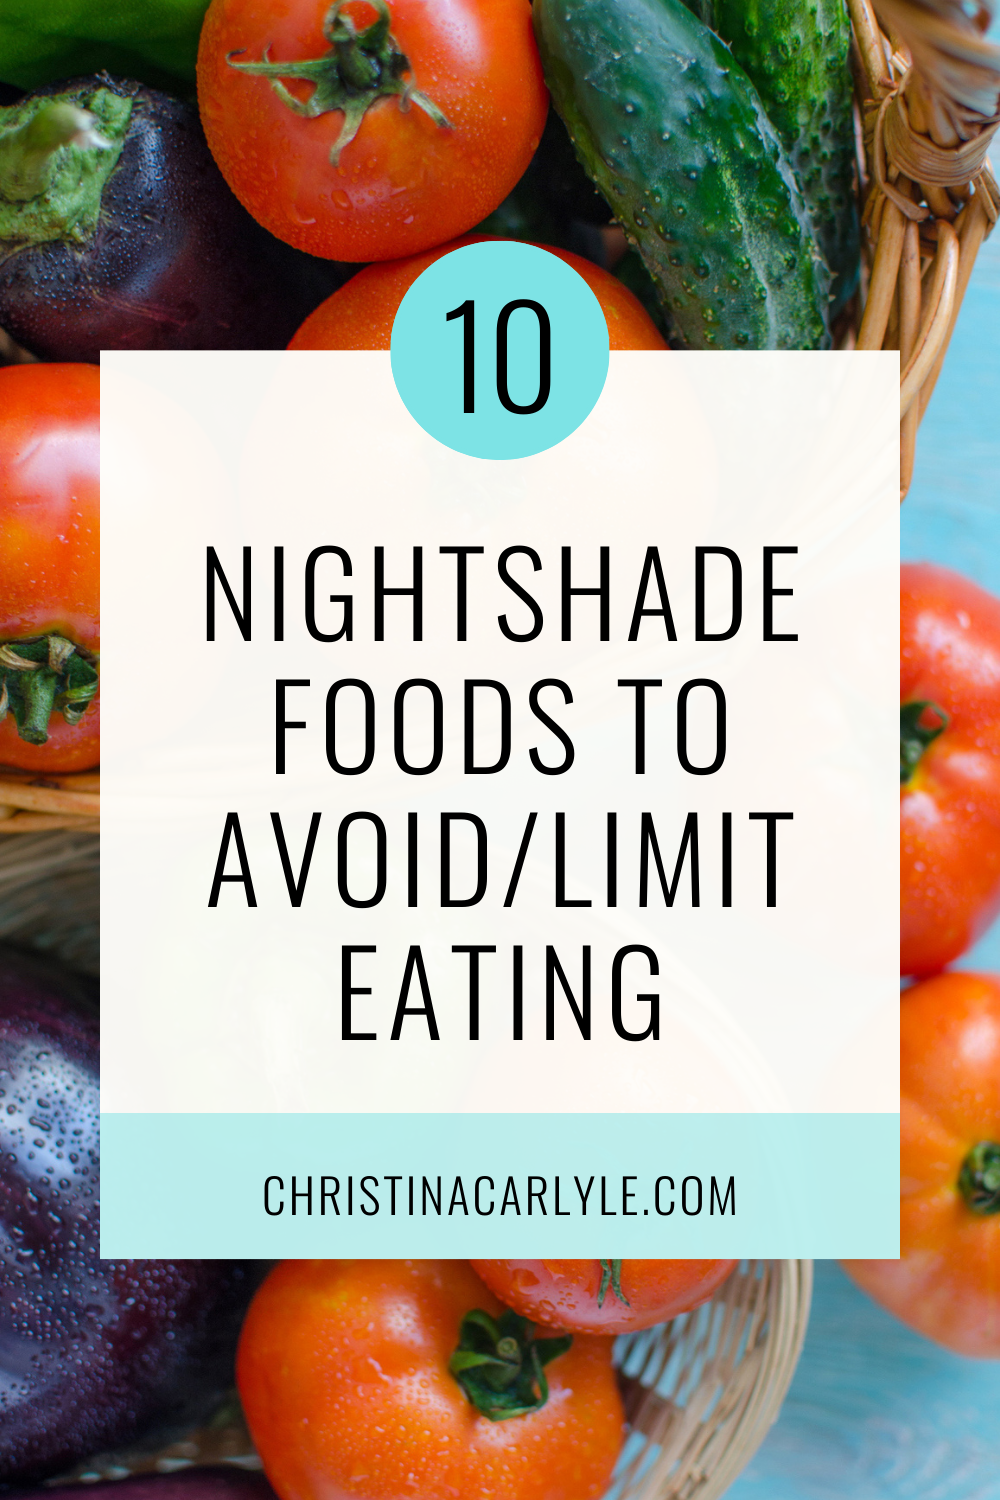 a flatlay of nightshade vegetables and text that says 10 nightshade foods to avoid/limit eating